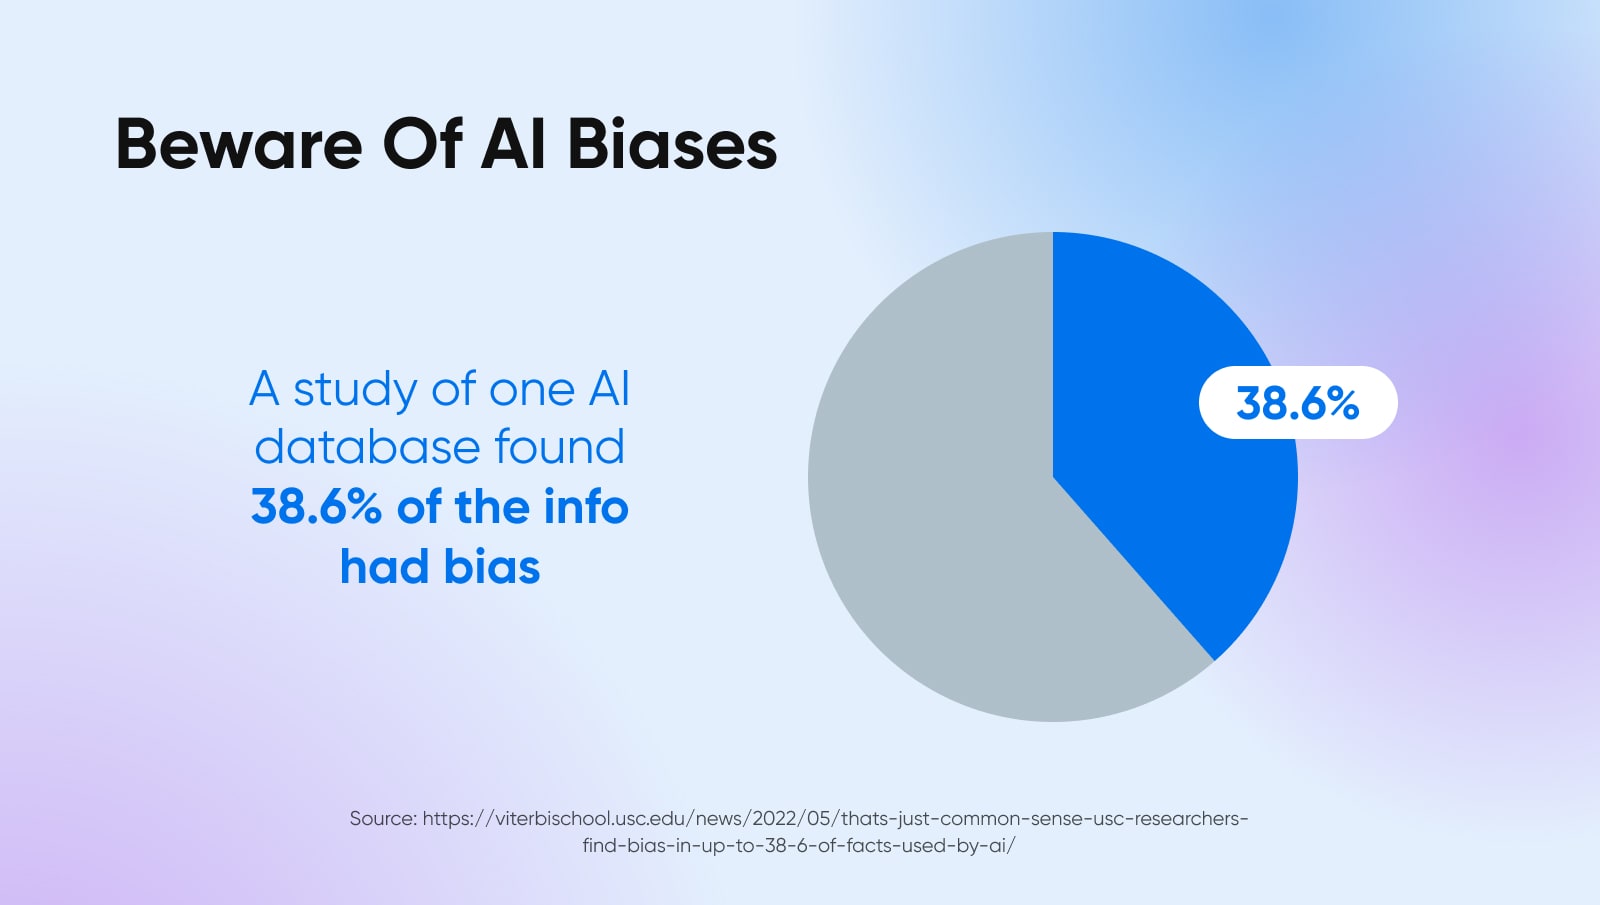 a study of one AI database found 38.6% of the inf had bias according to viterbischool.usc.edu